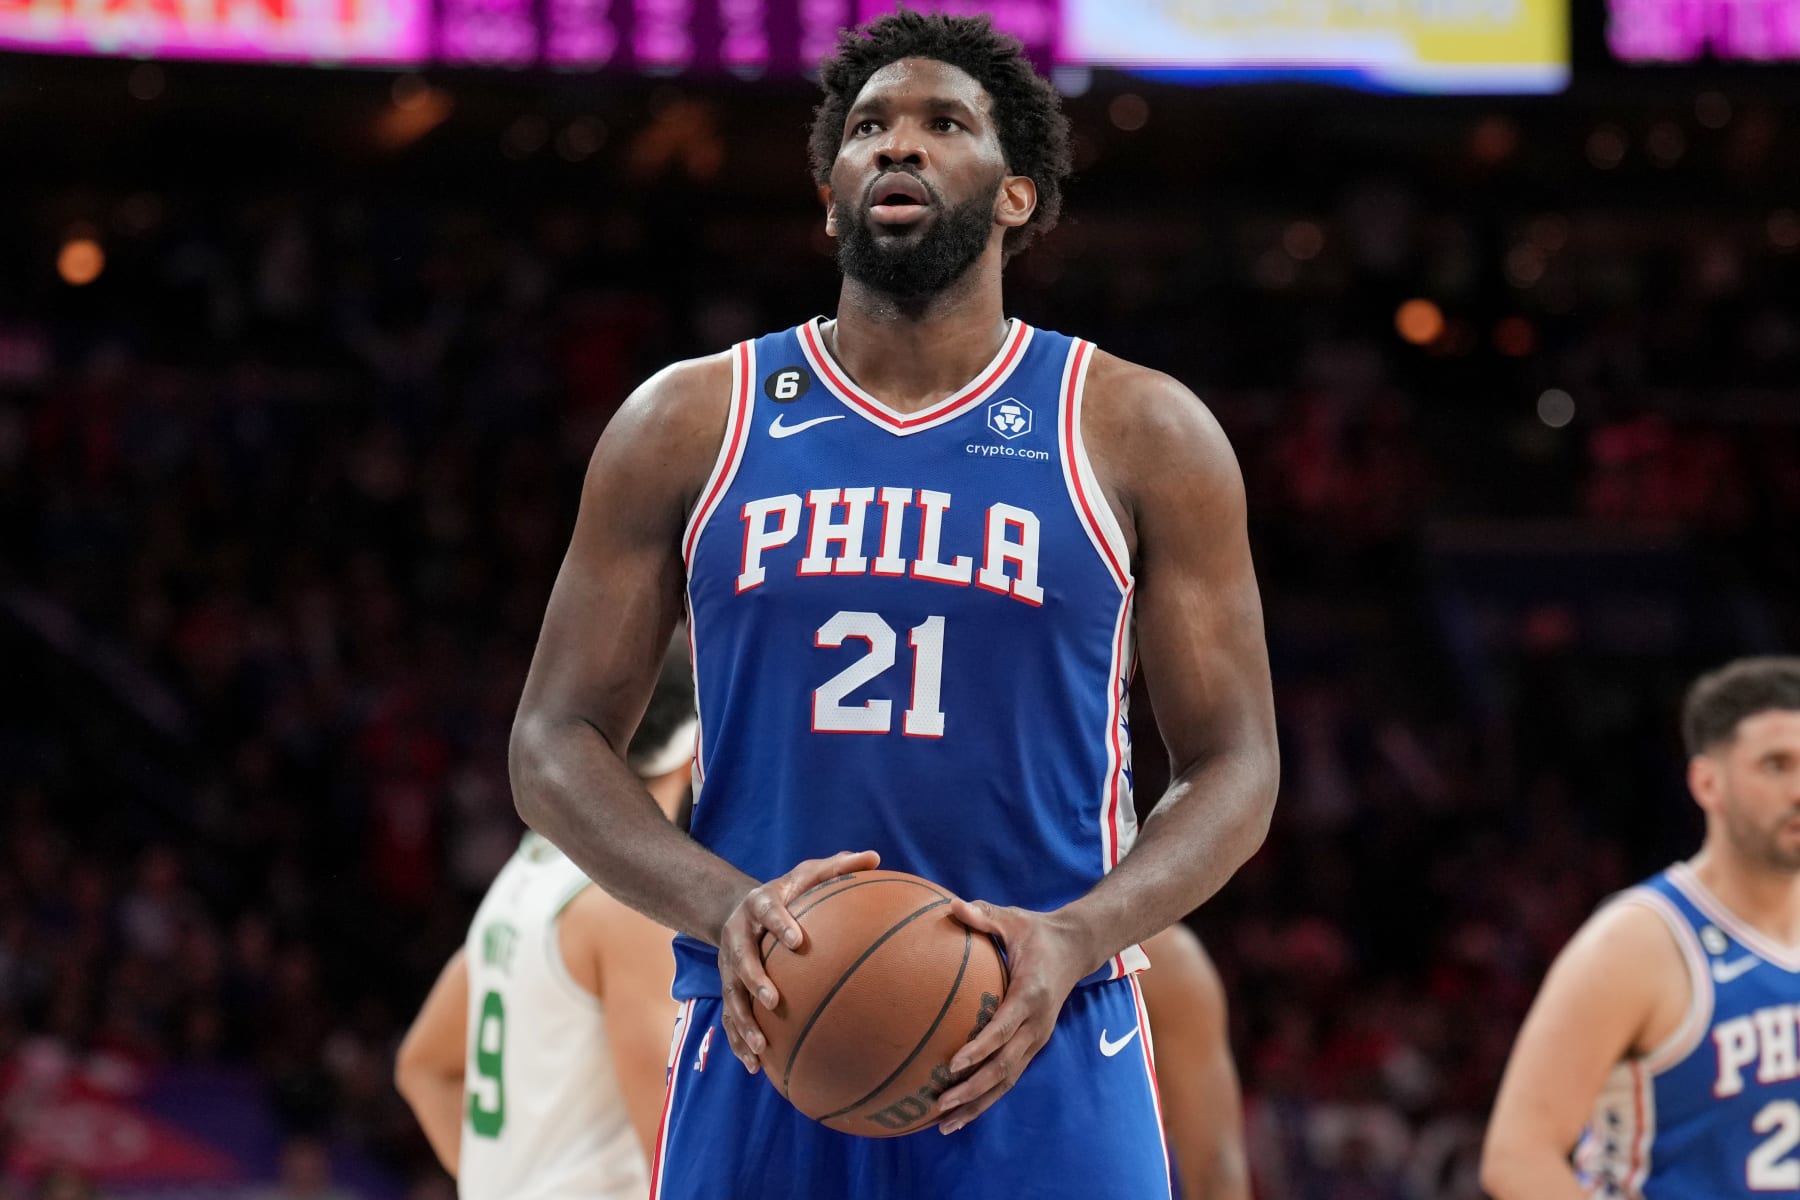 Joel Embiid Drafted by Philadelphia 76ers: Latest News, Reaction